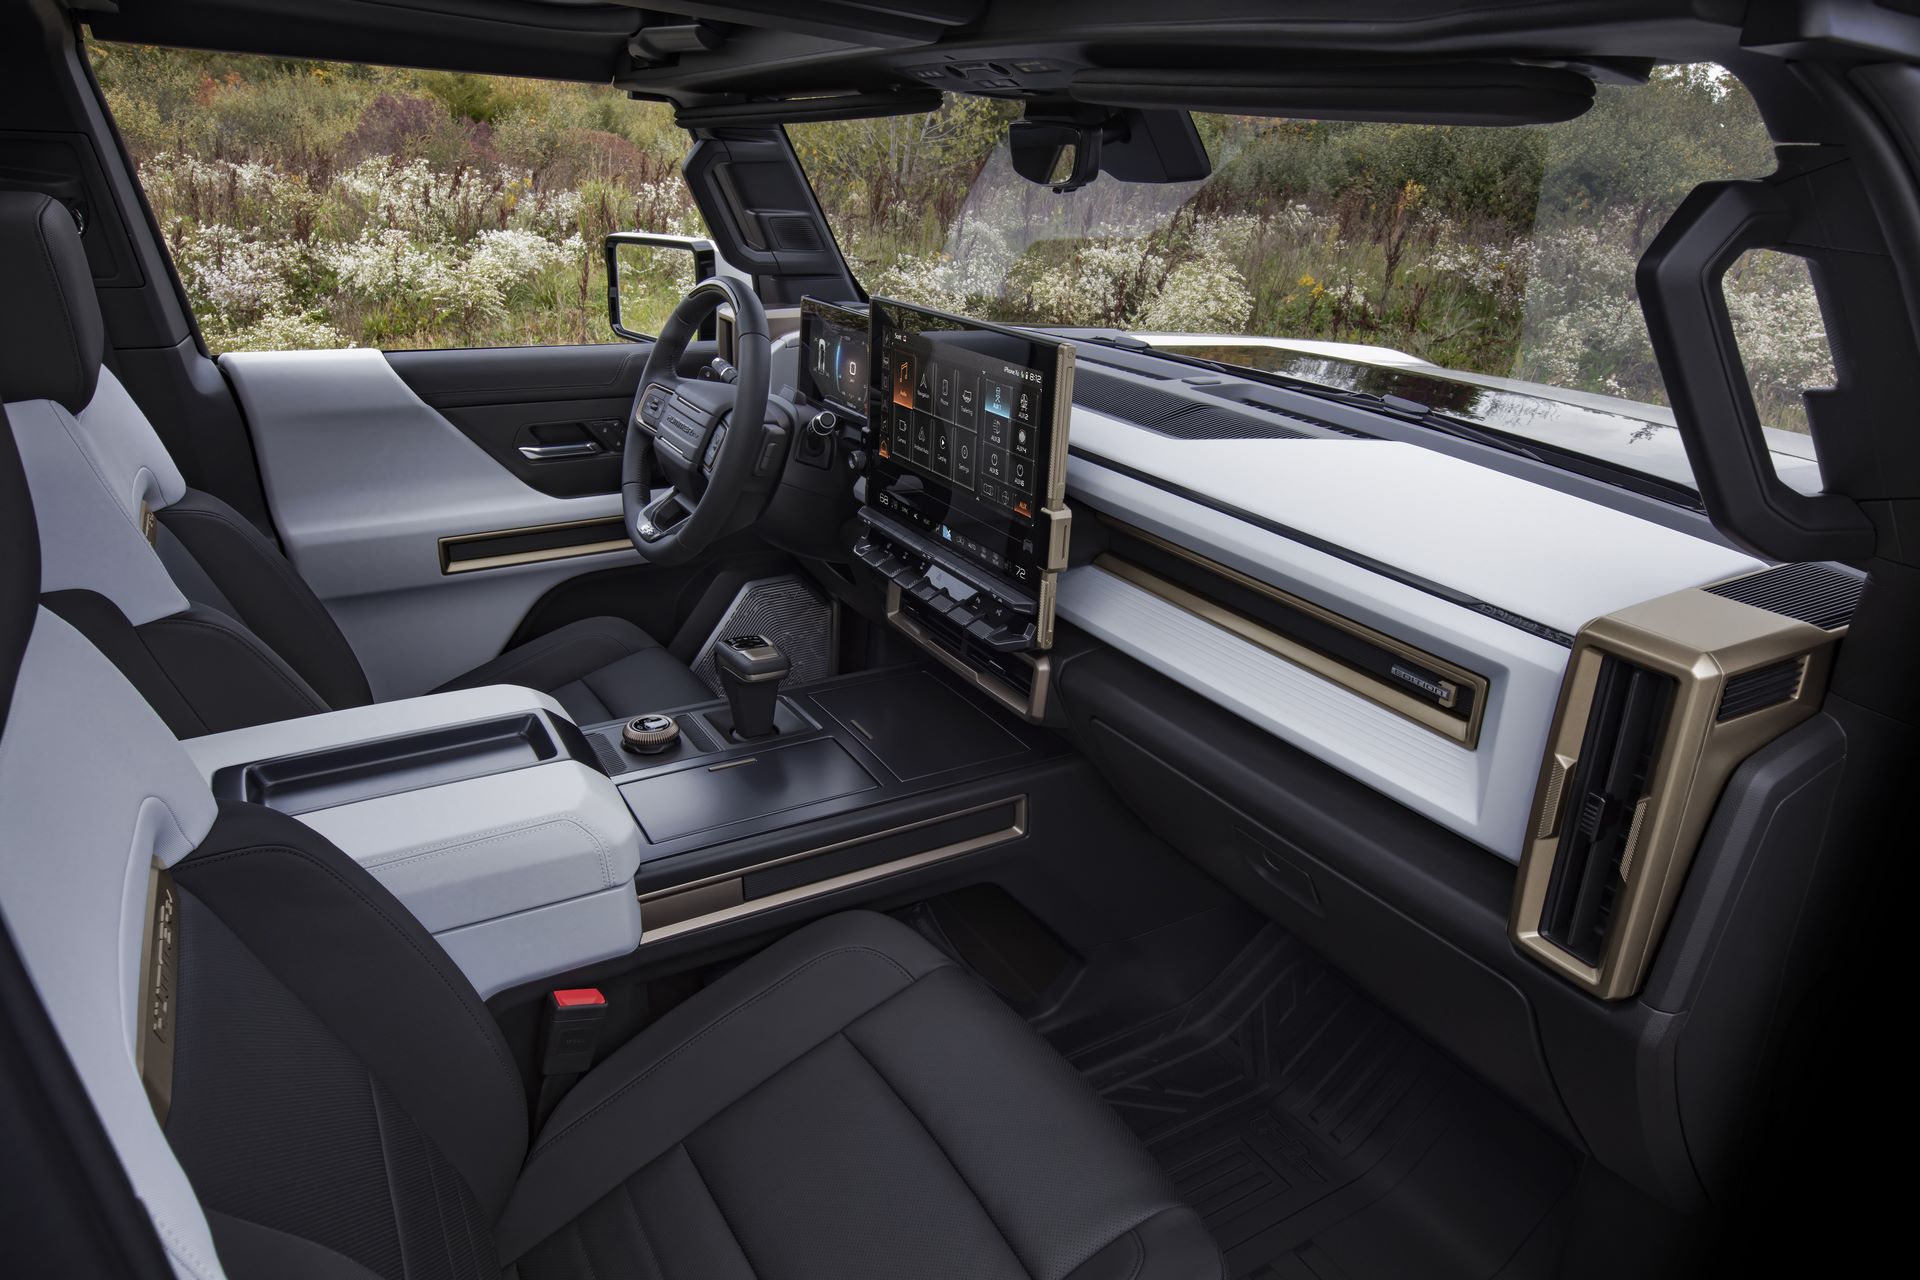 The GMC HUMMER EV’s design visually communicates extreme capability, reinforced with rugged architectural details that are delivered with a premium, well-executed and appointed interior.